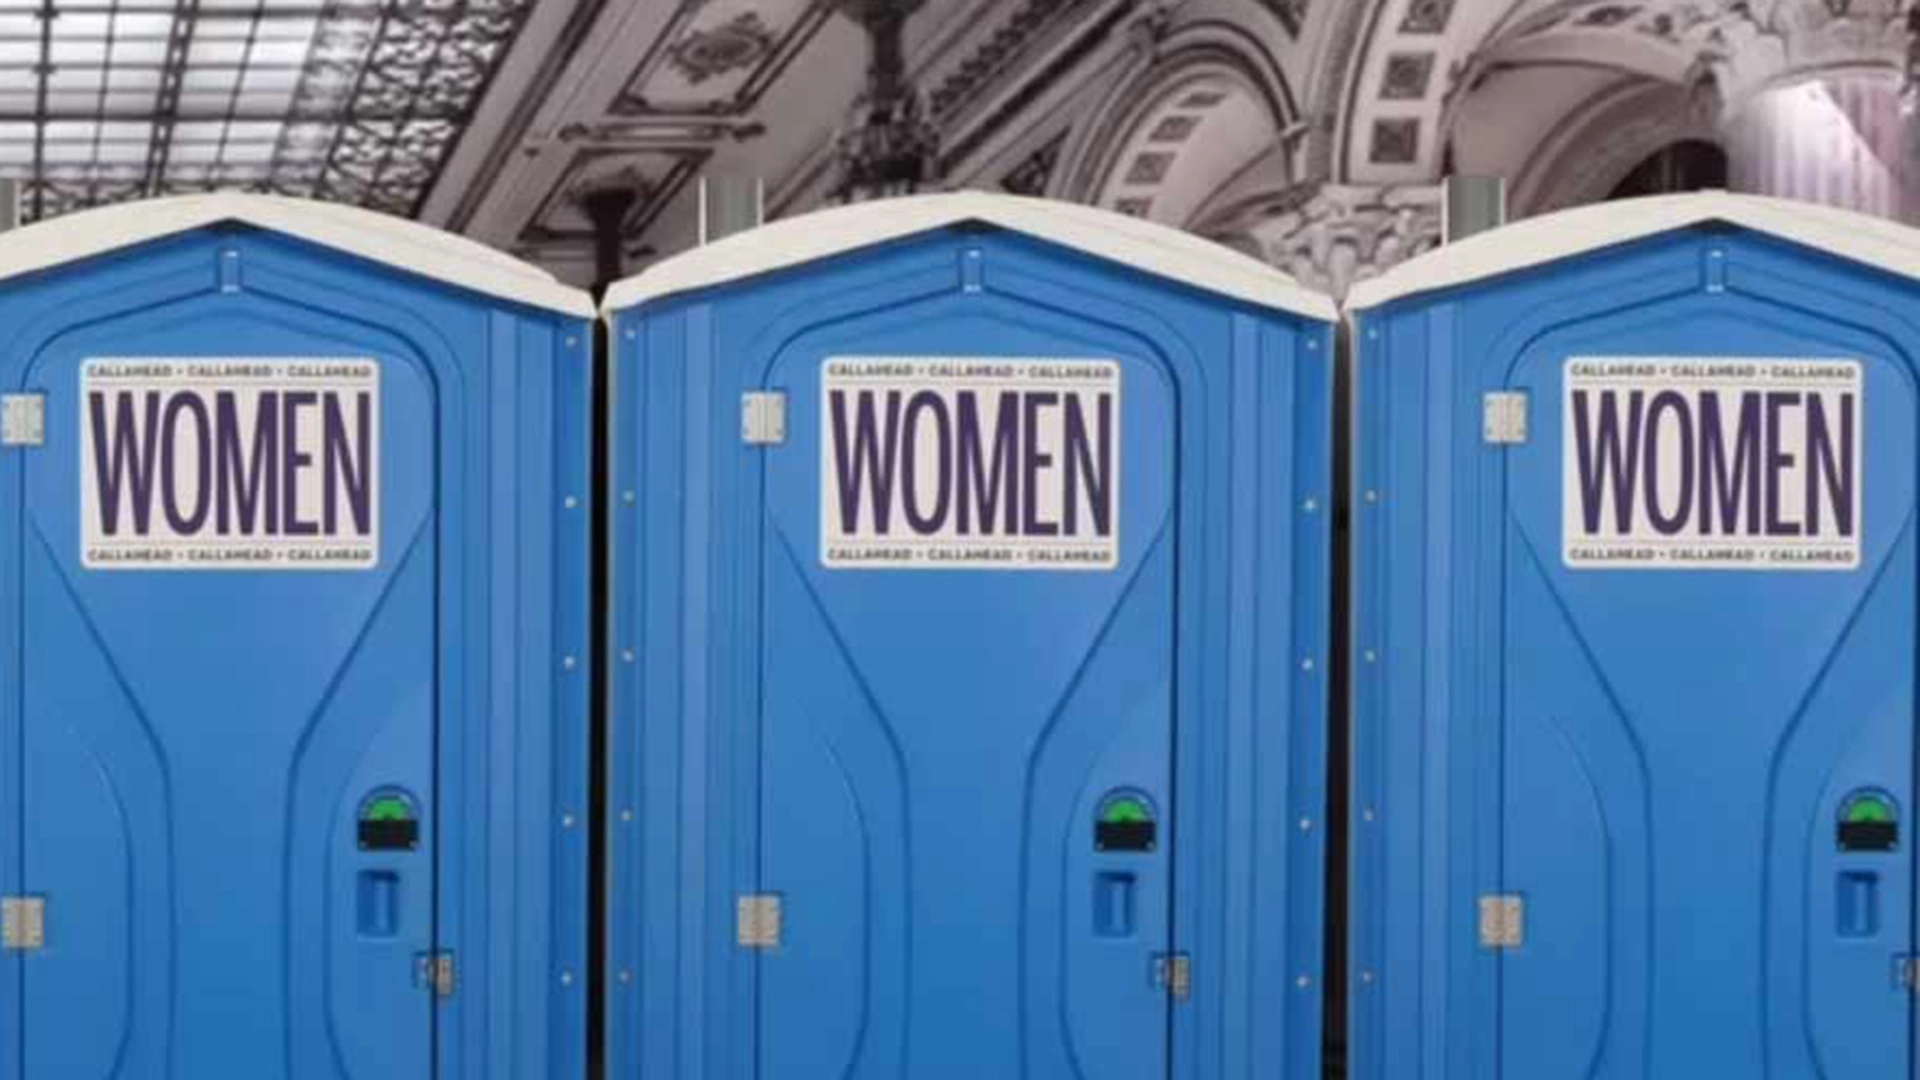 Blue women's porta potties - The Only Guide You Need to Starting a Portable Restroom Business - ServiceCore Blog